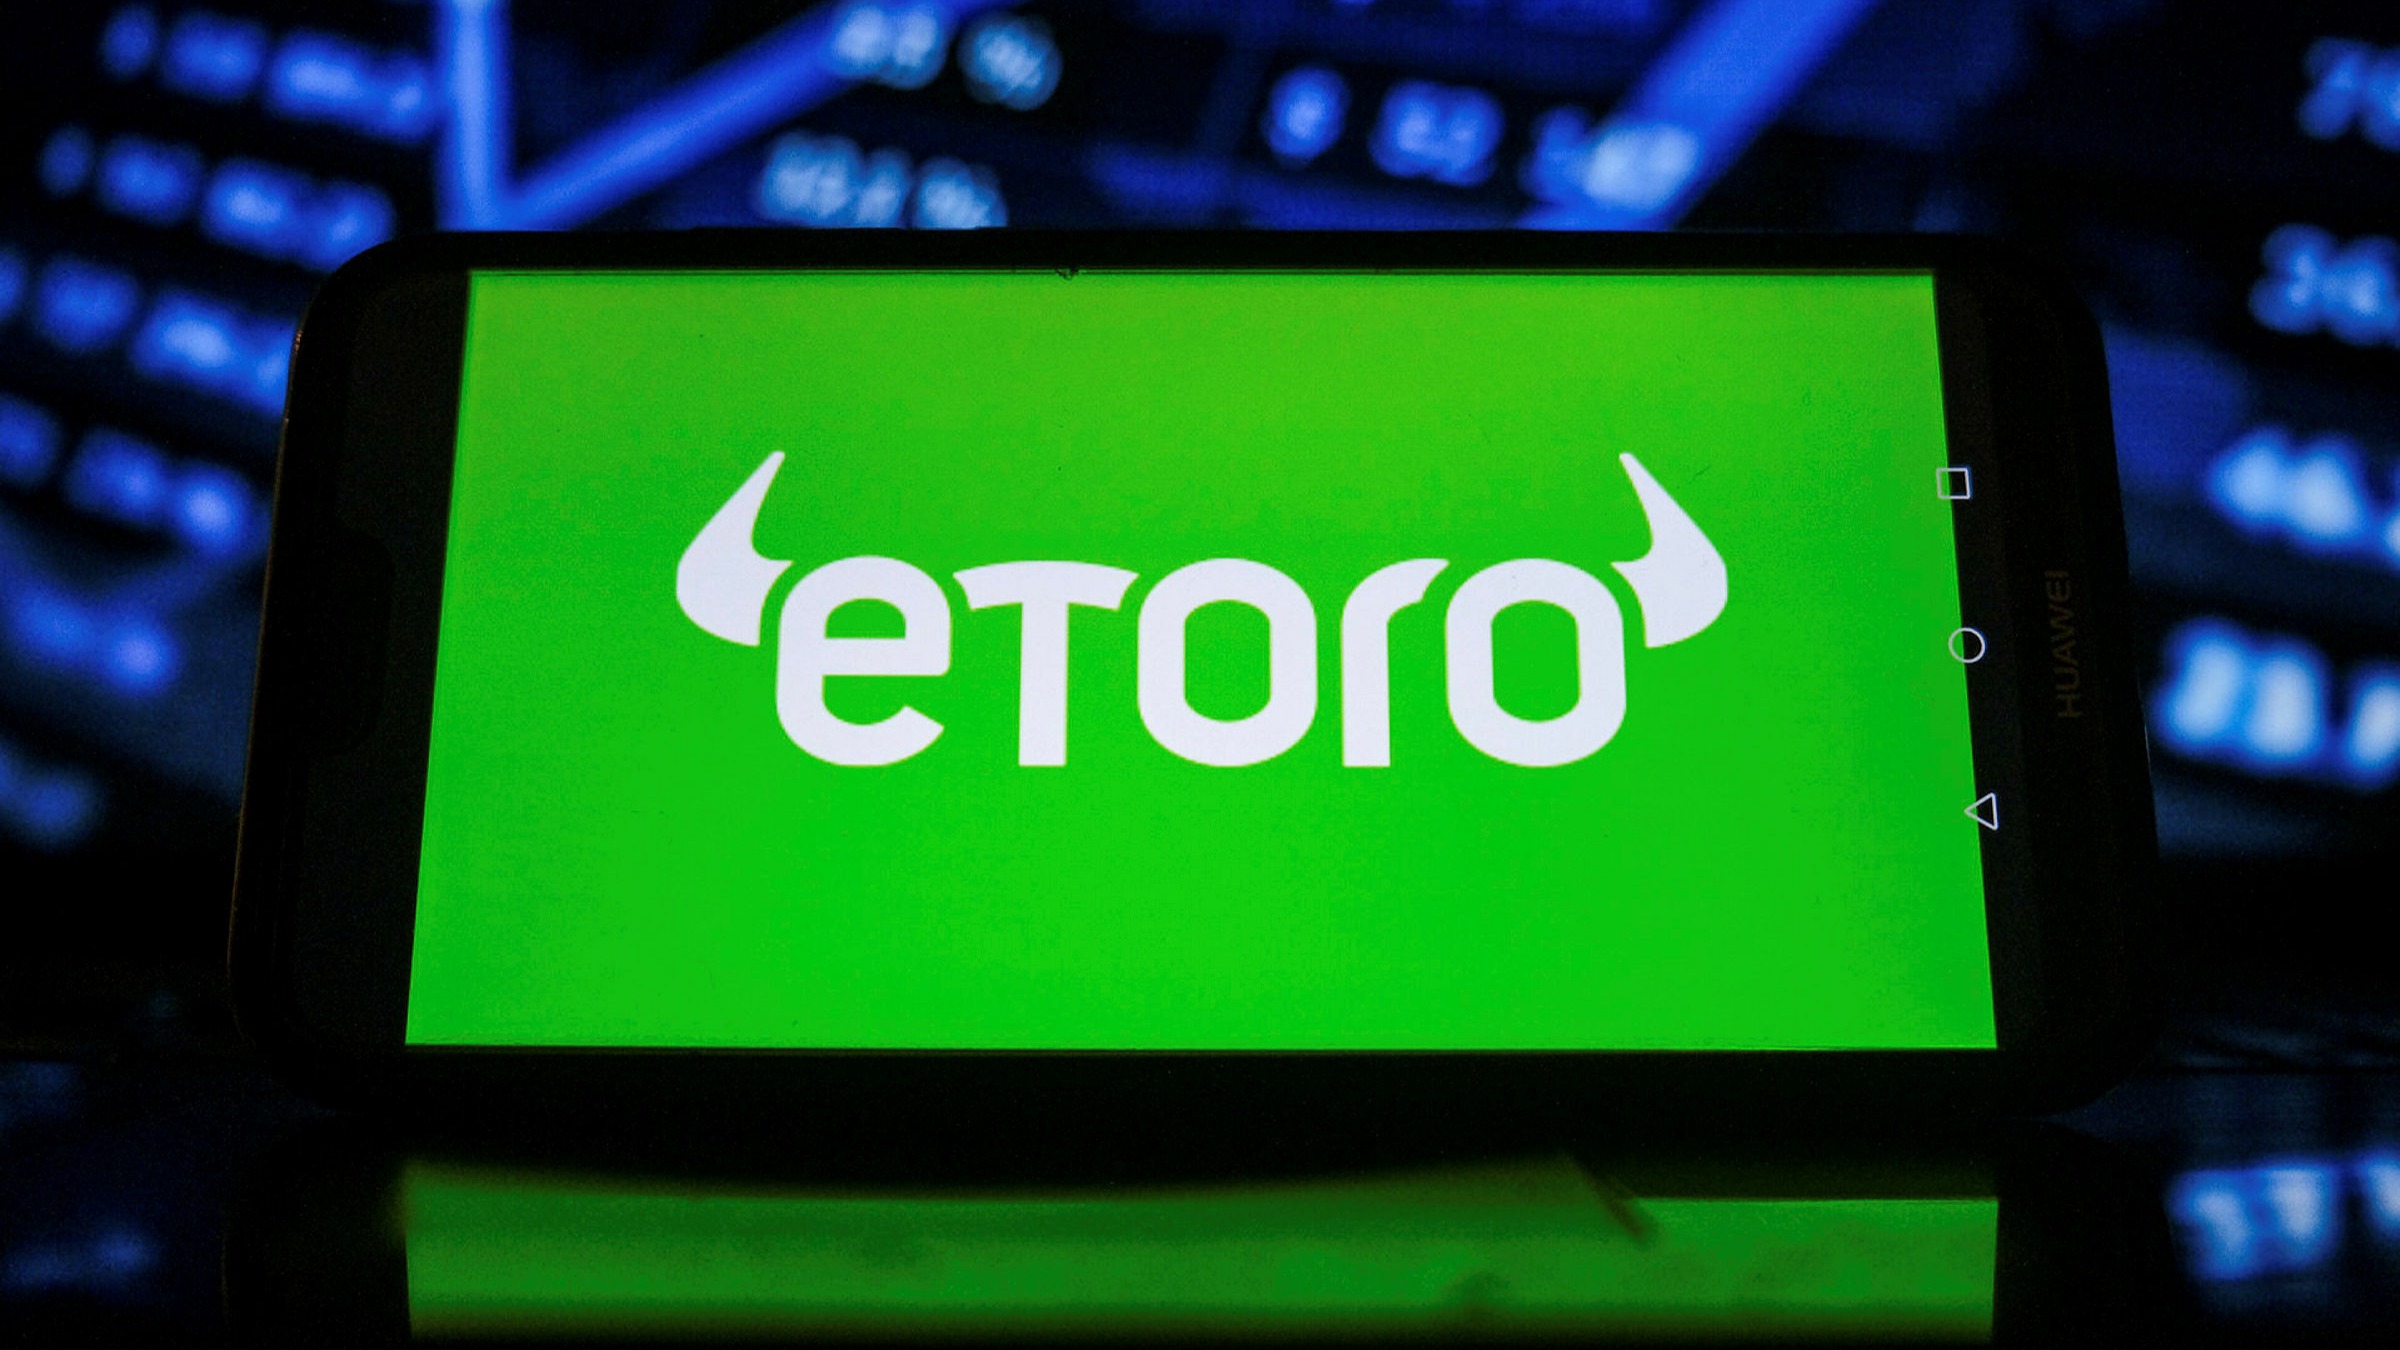 Online broker eToro in $10bn deal to go public with Spac | Financial Times